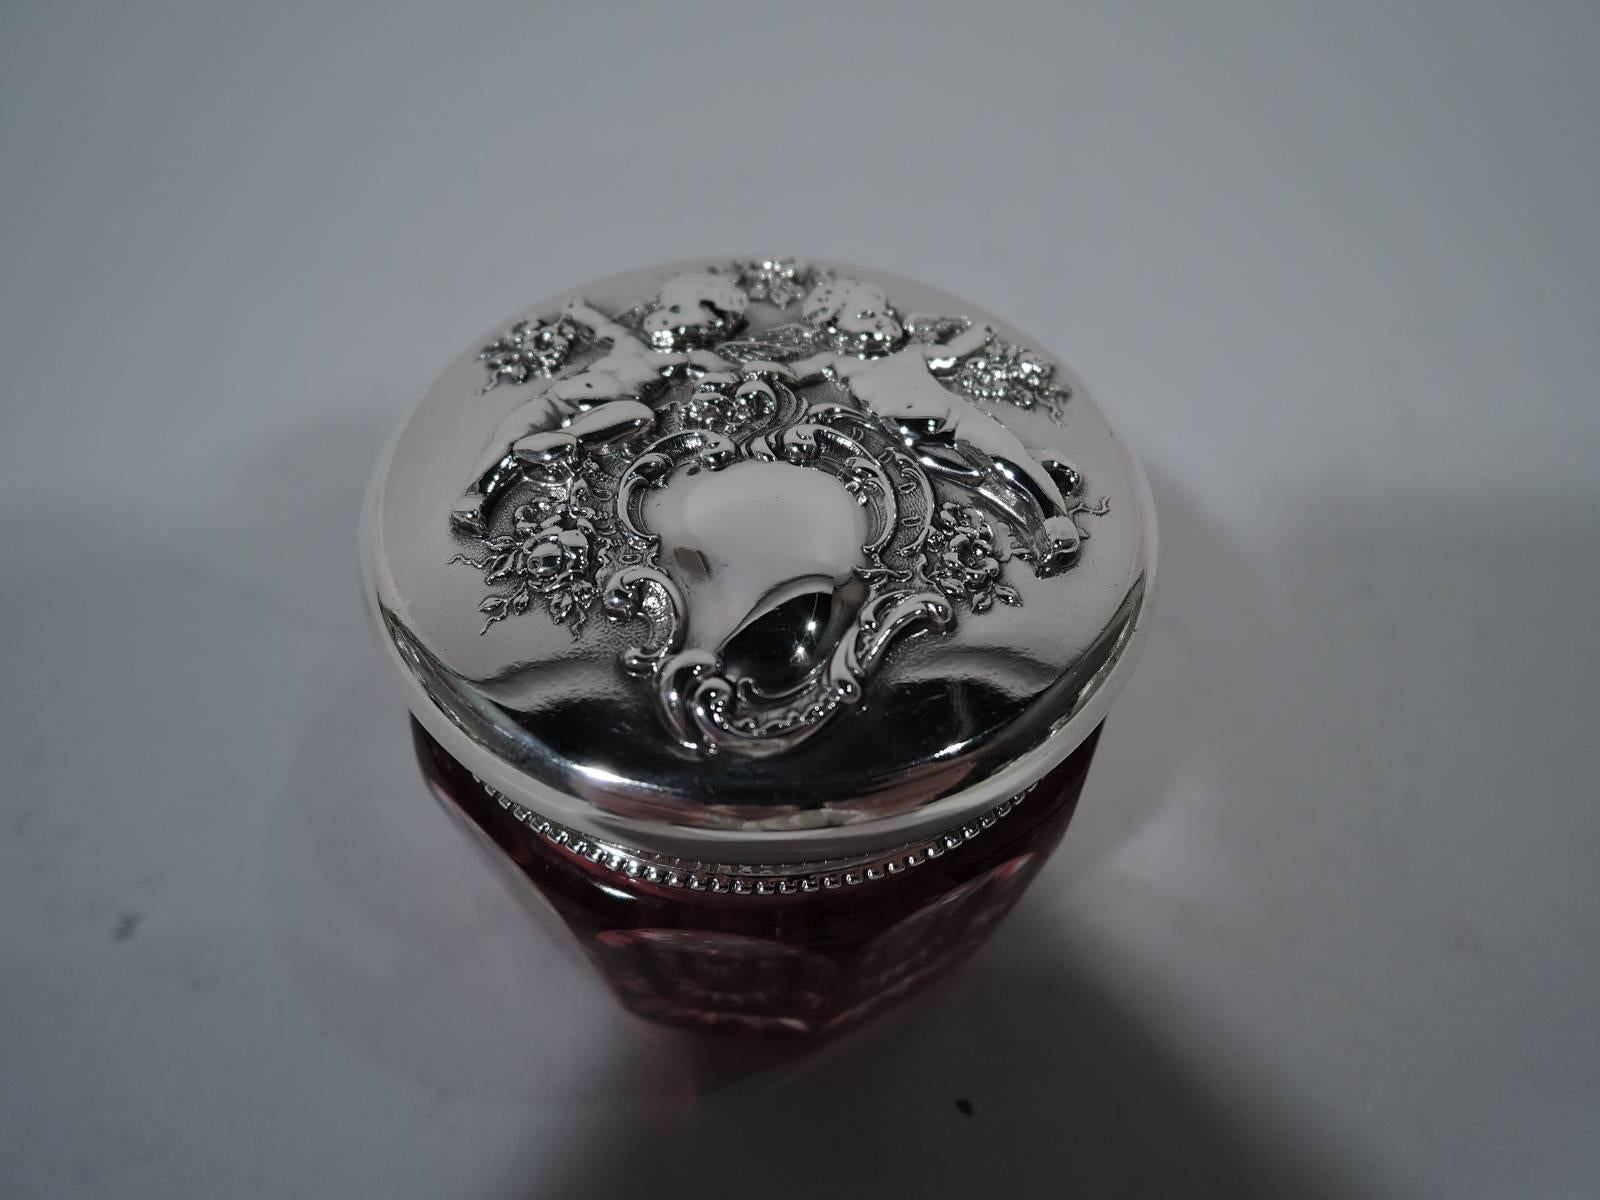 Art Nouveau sterling silver and glass vanity jar. Made by Reed & Barton in Taunton, Mass. Faceted clear glass jar with cranberry flashing. Sterling silver cover with dentil rim and chased and repousse cherubs gripping bouquets and reclining on